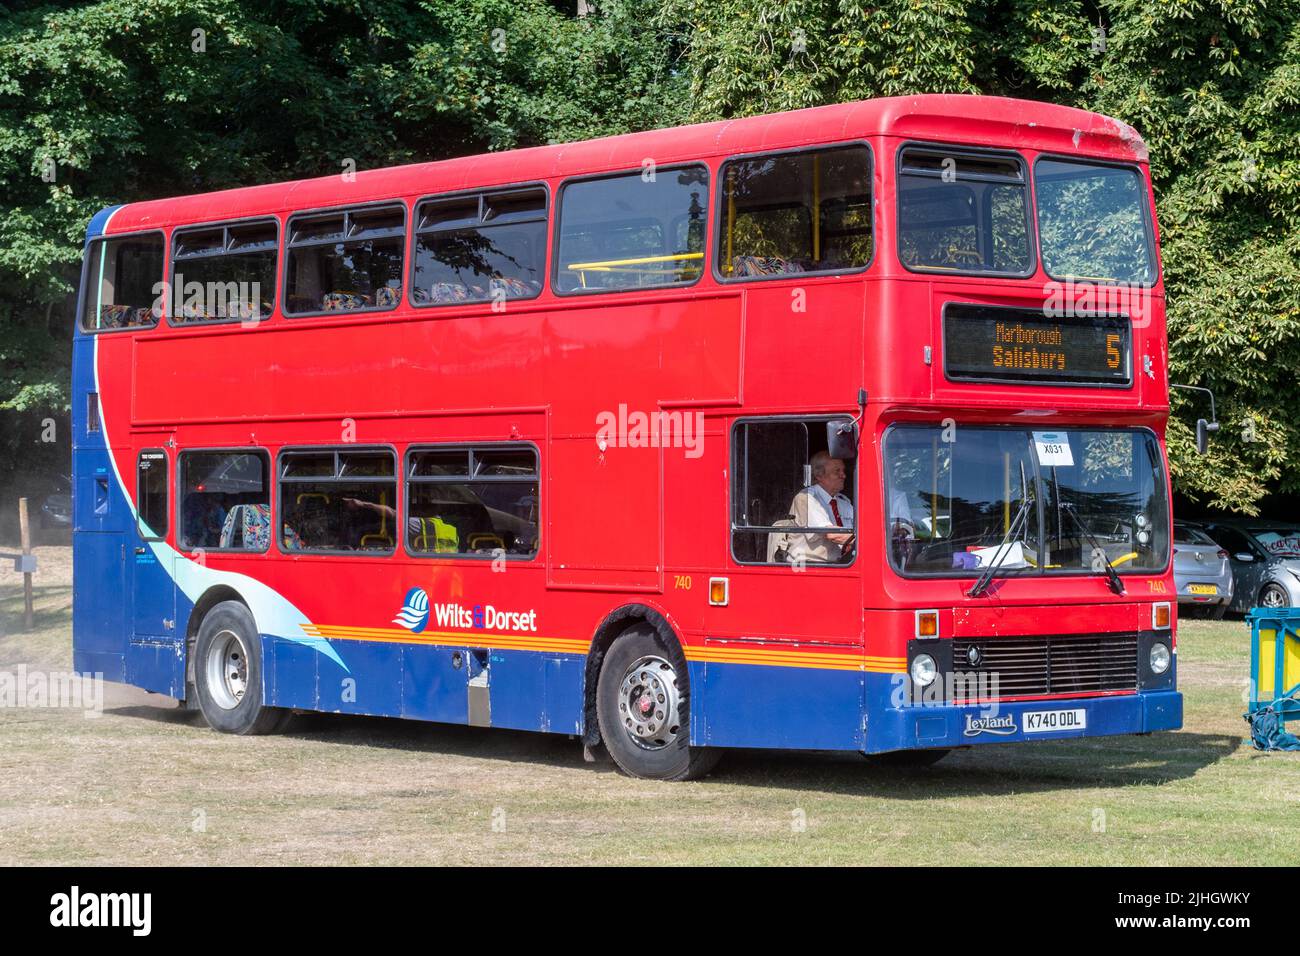 A vintage Wilts & Dorset Leland double-decker bus with red and blue livery at a transport event in Hampshire, England, UK Stock Photo